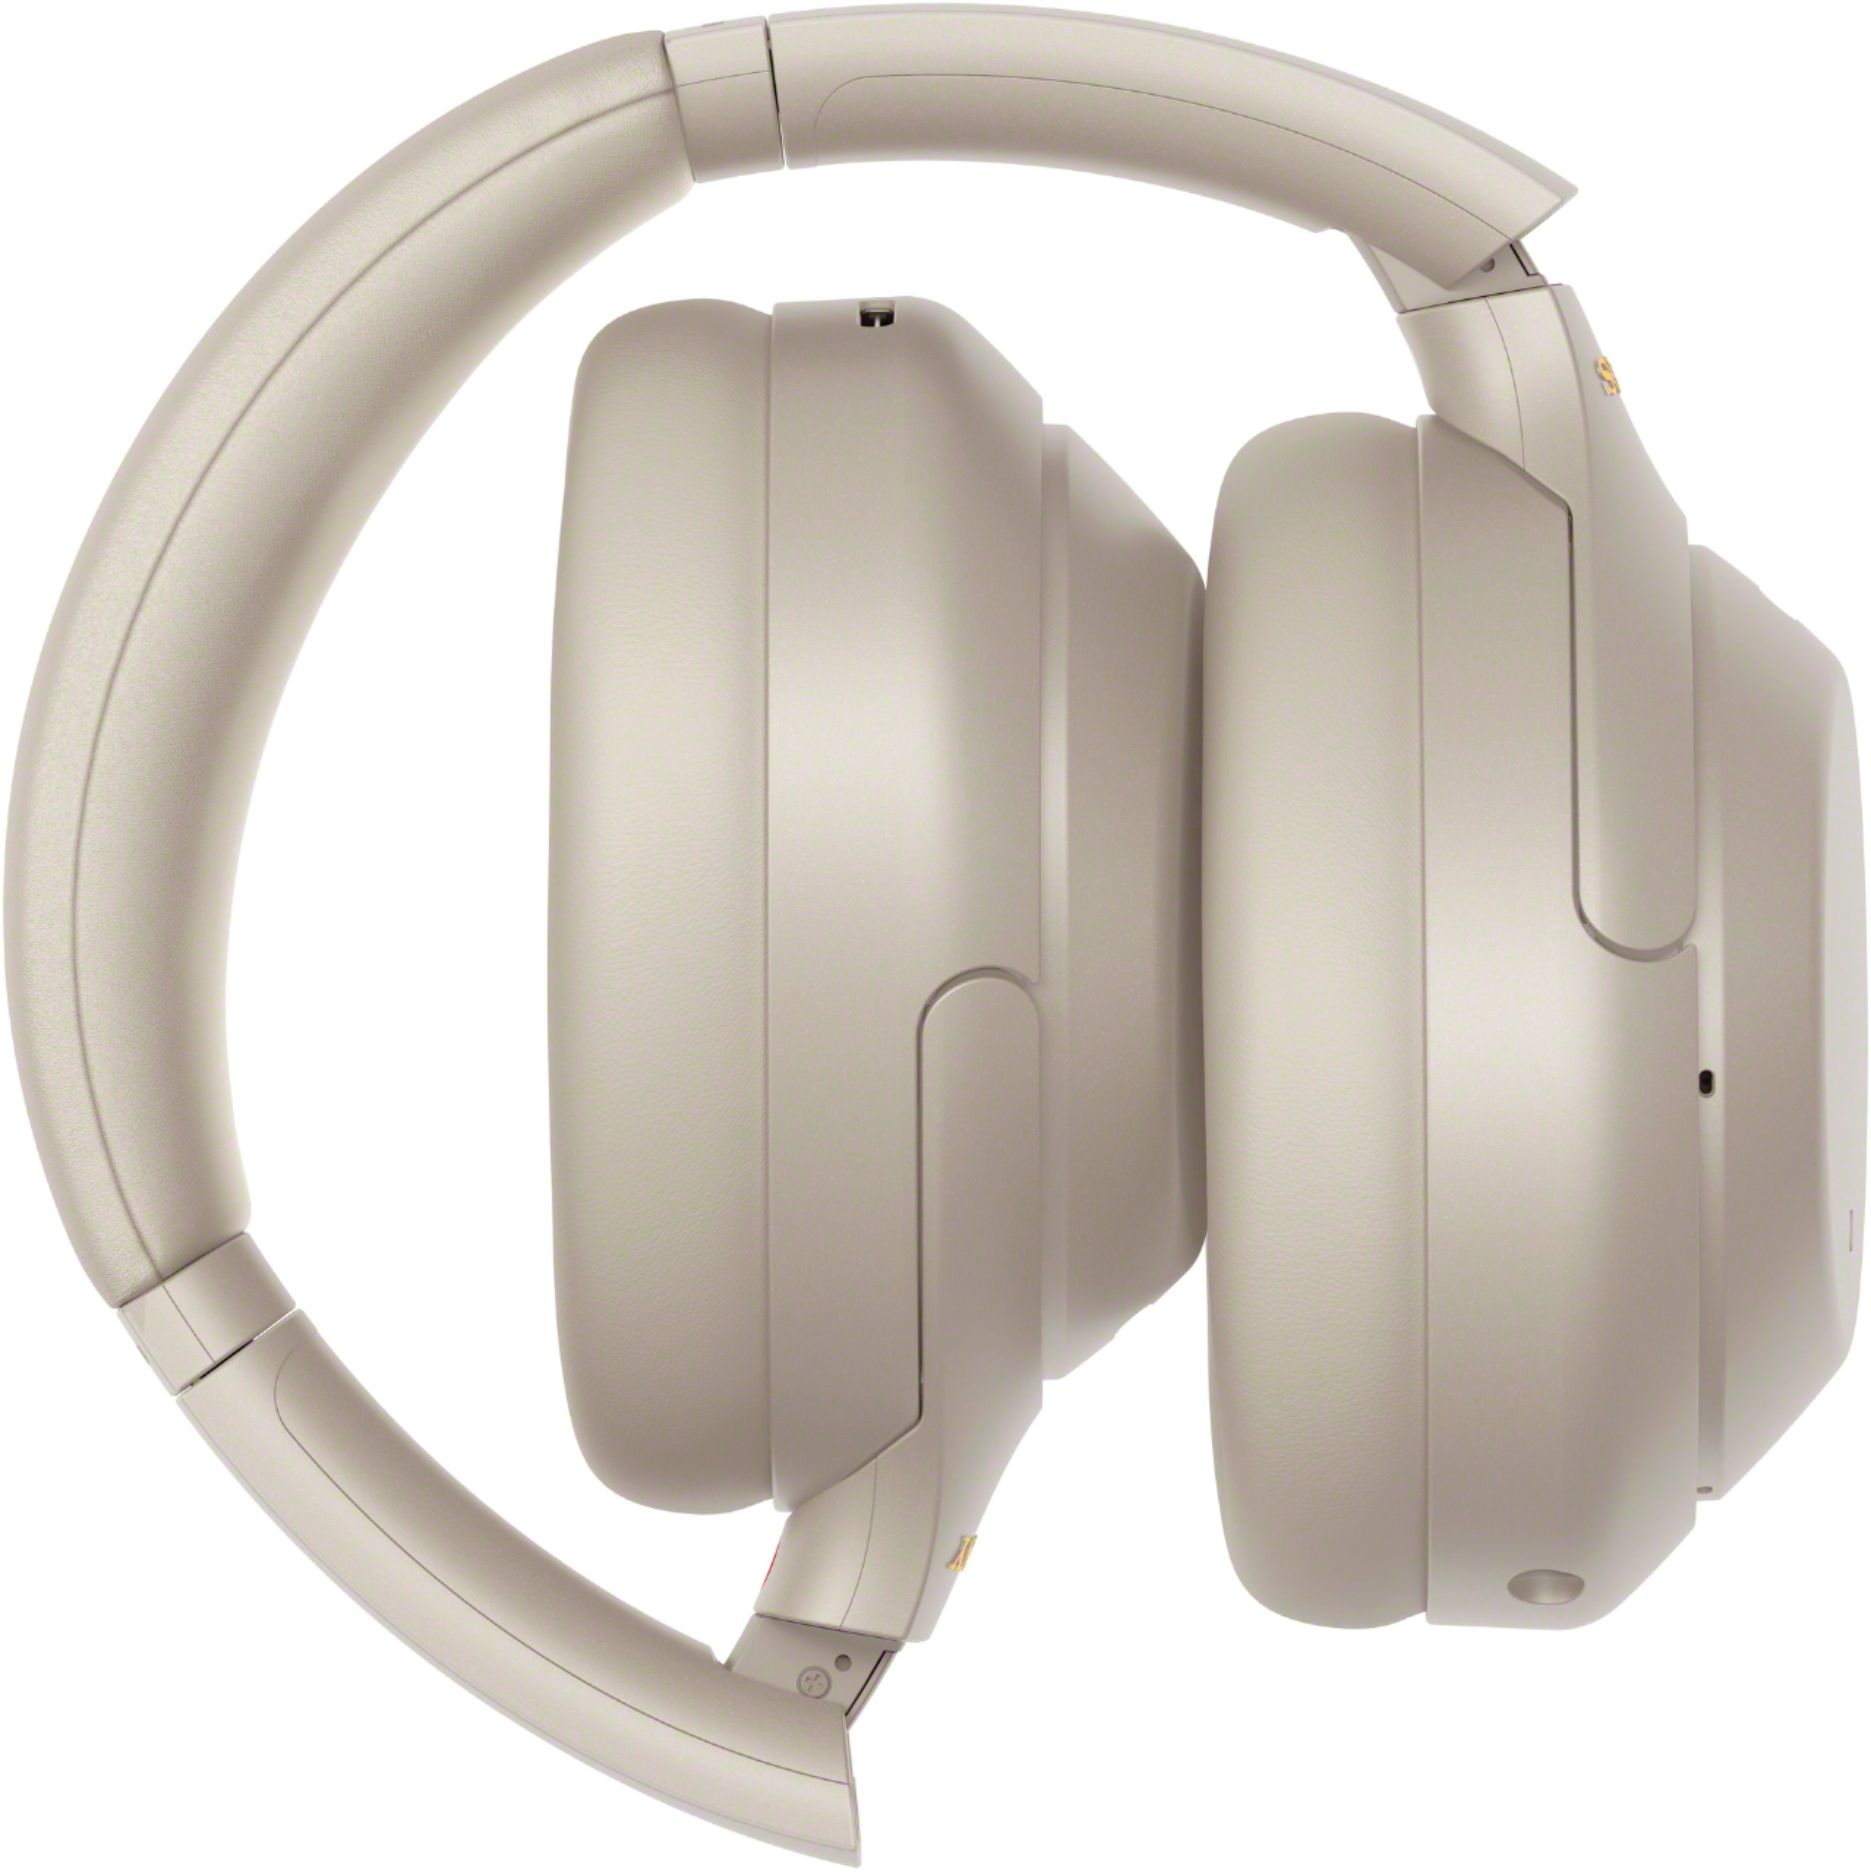 Sony WH-1000XM4 Wireless Noise-Canceling Over-Ear WH1000XM4/B